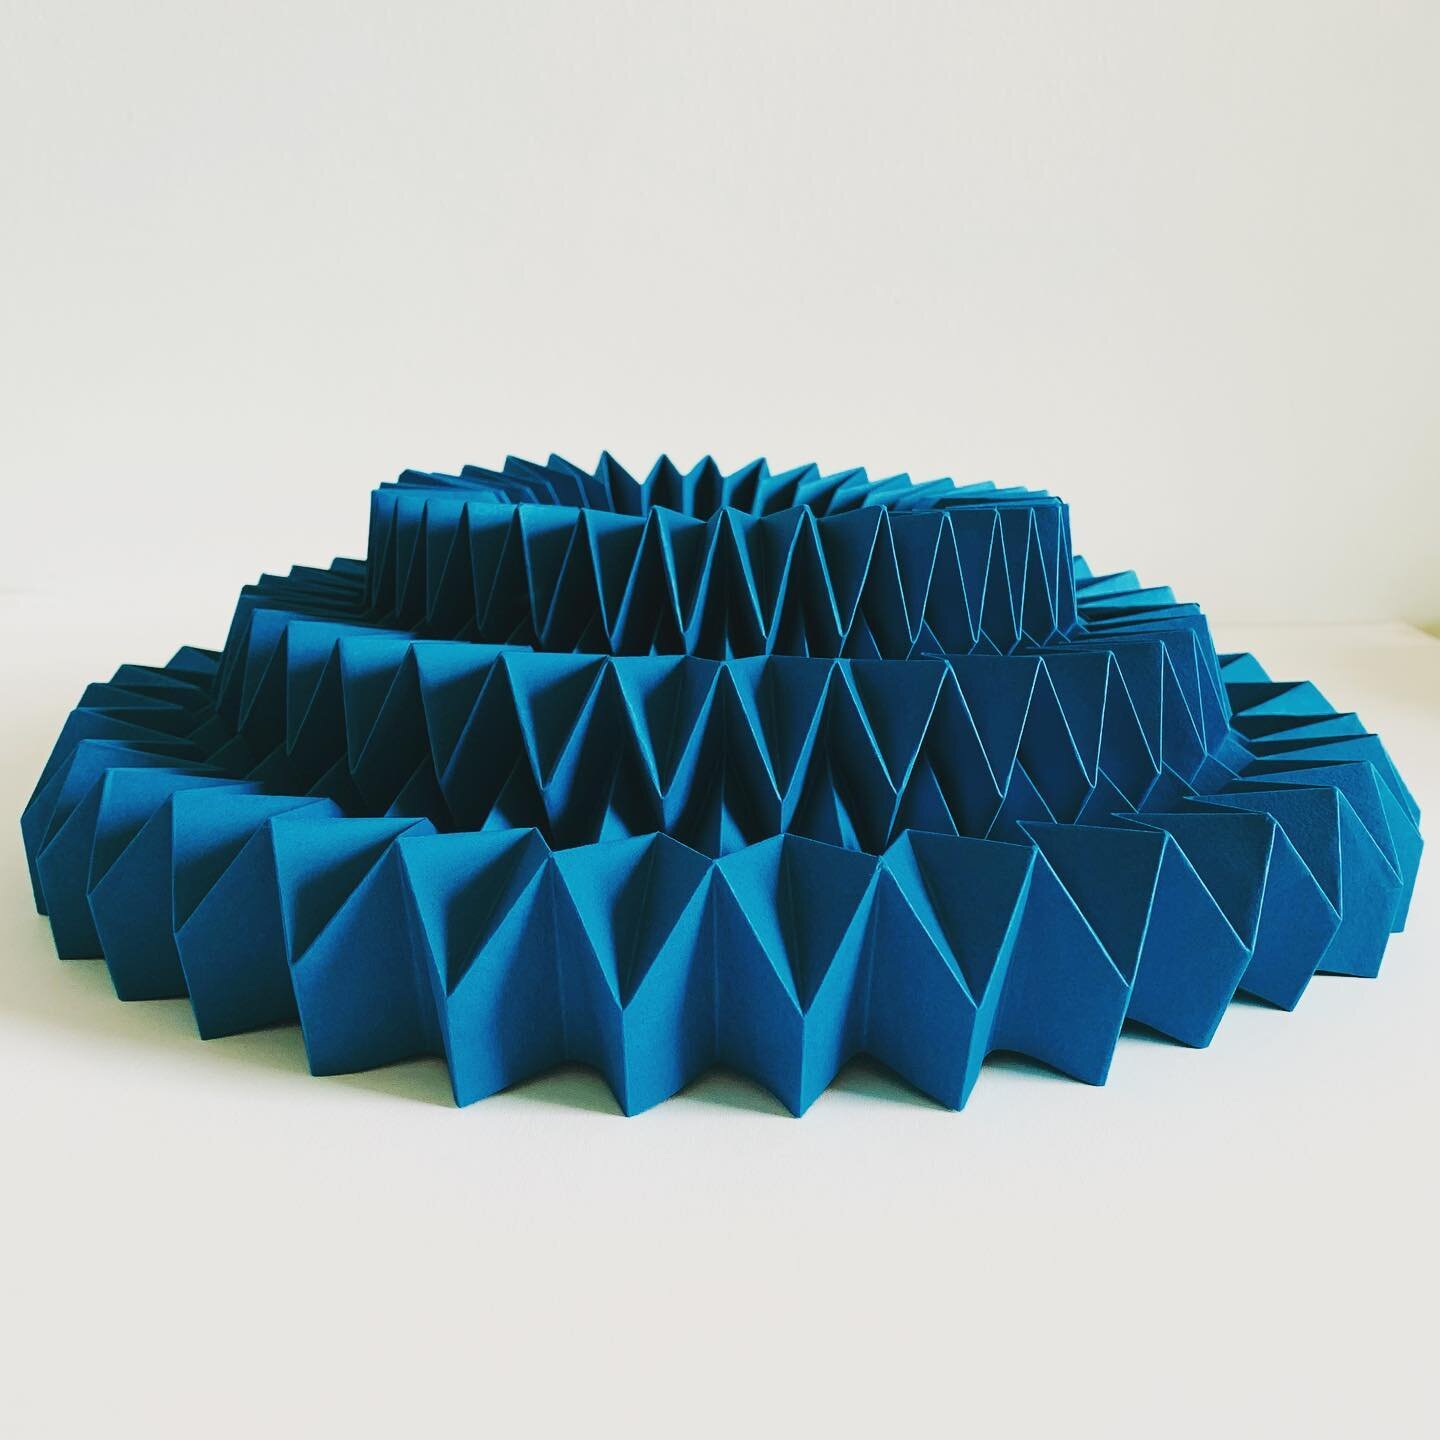 Folded tiers in blue 
.
.
.
.
#fold #folded #paper #papercraft #papercrafts #origami #origamicraft #colour #workingwithcolour #handmade #madebyhand #craft #design #3Dcraft #geometry #geometric #papercrafts